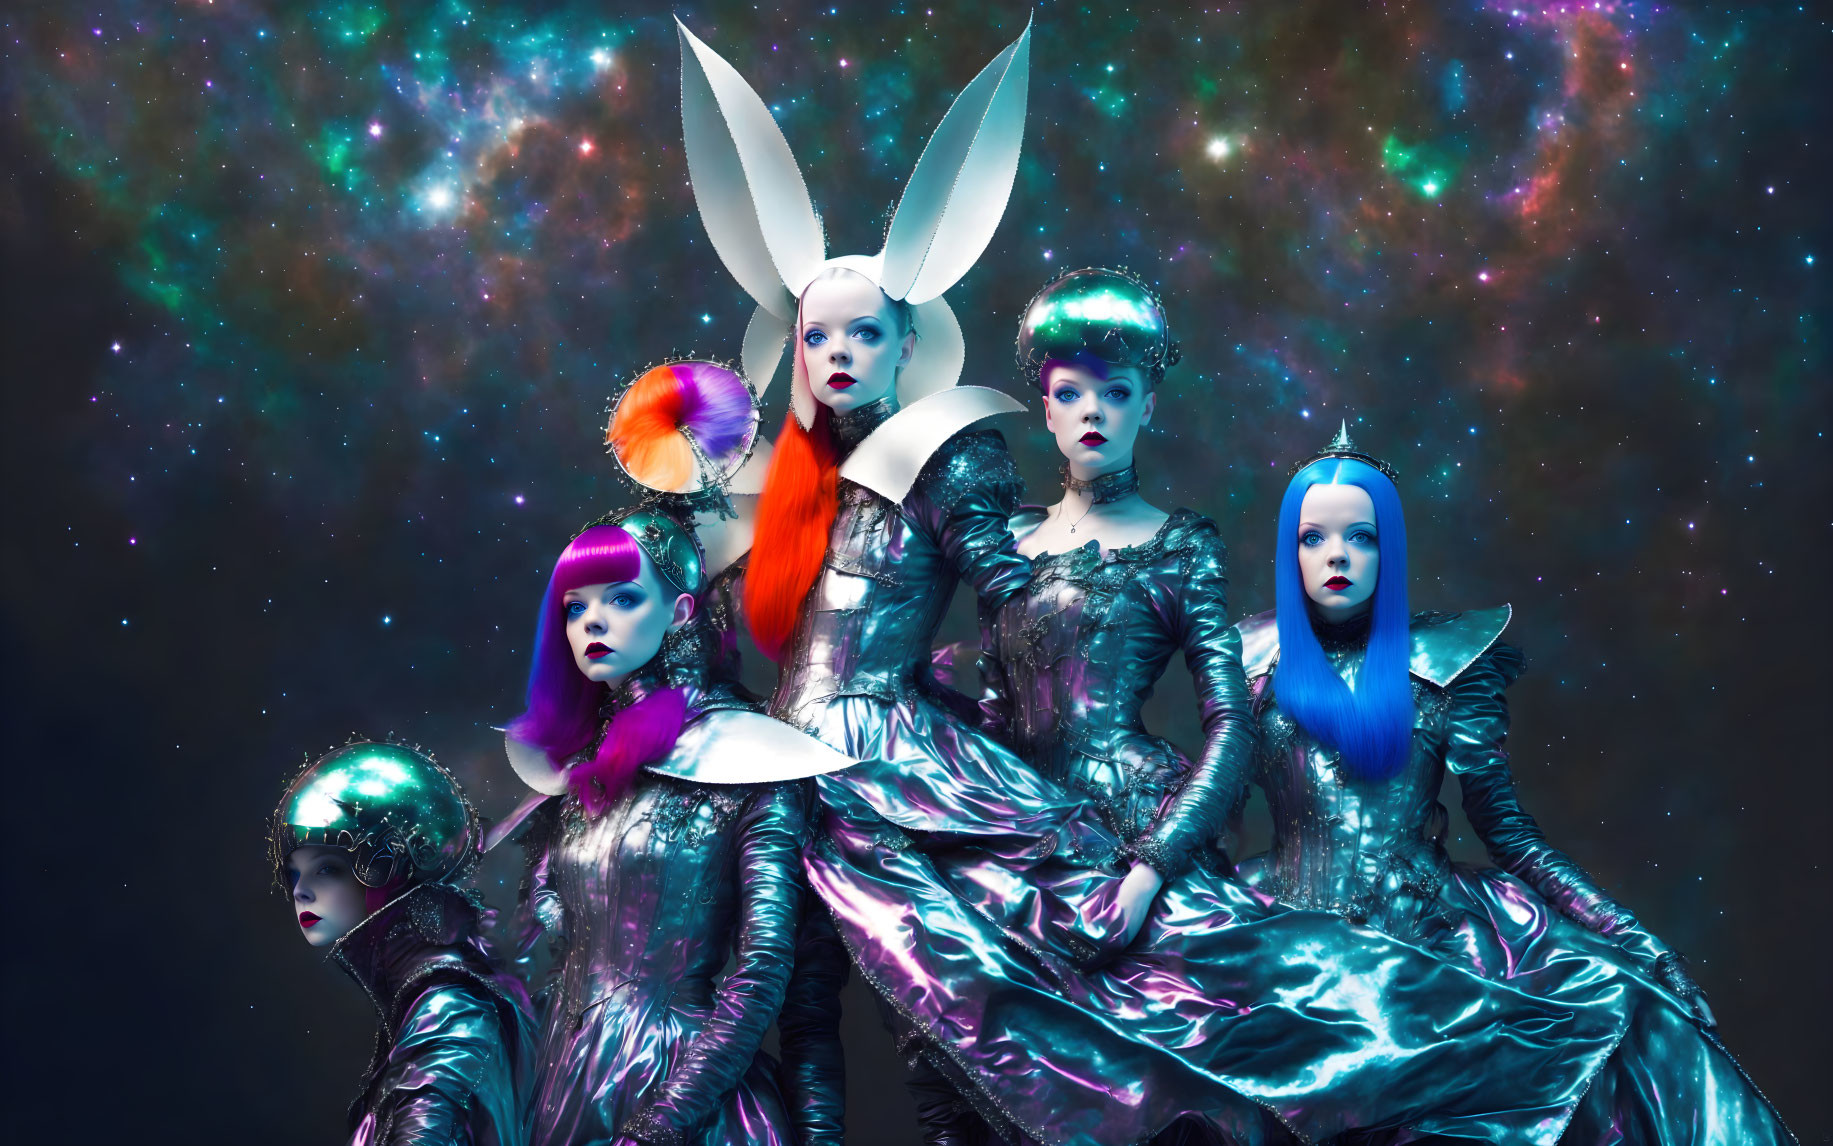 Four models in futuristic metallic outfits and avant-garde hairstyles against cosmic backdrop